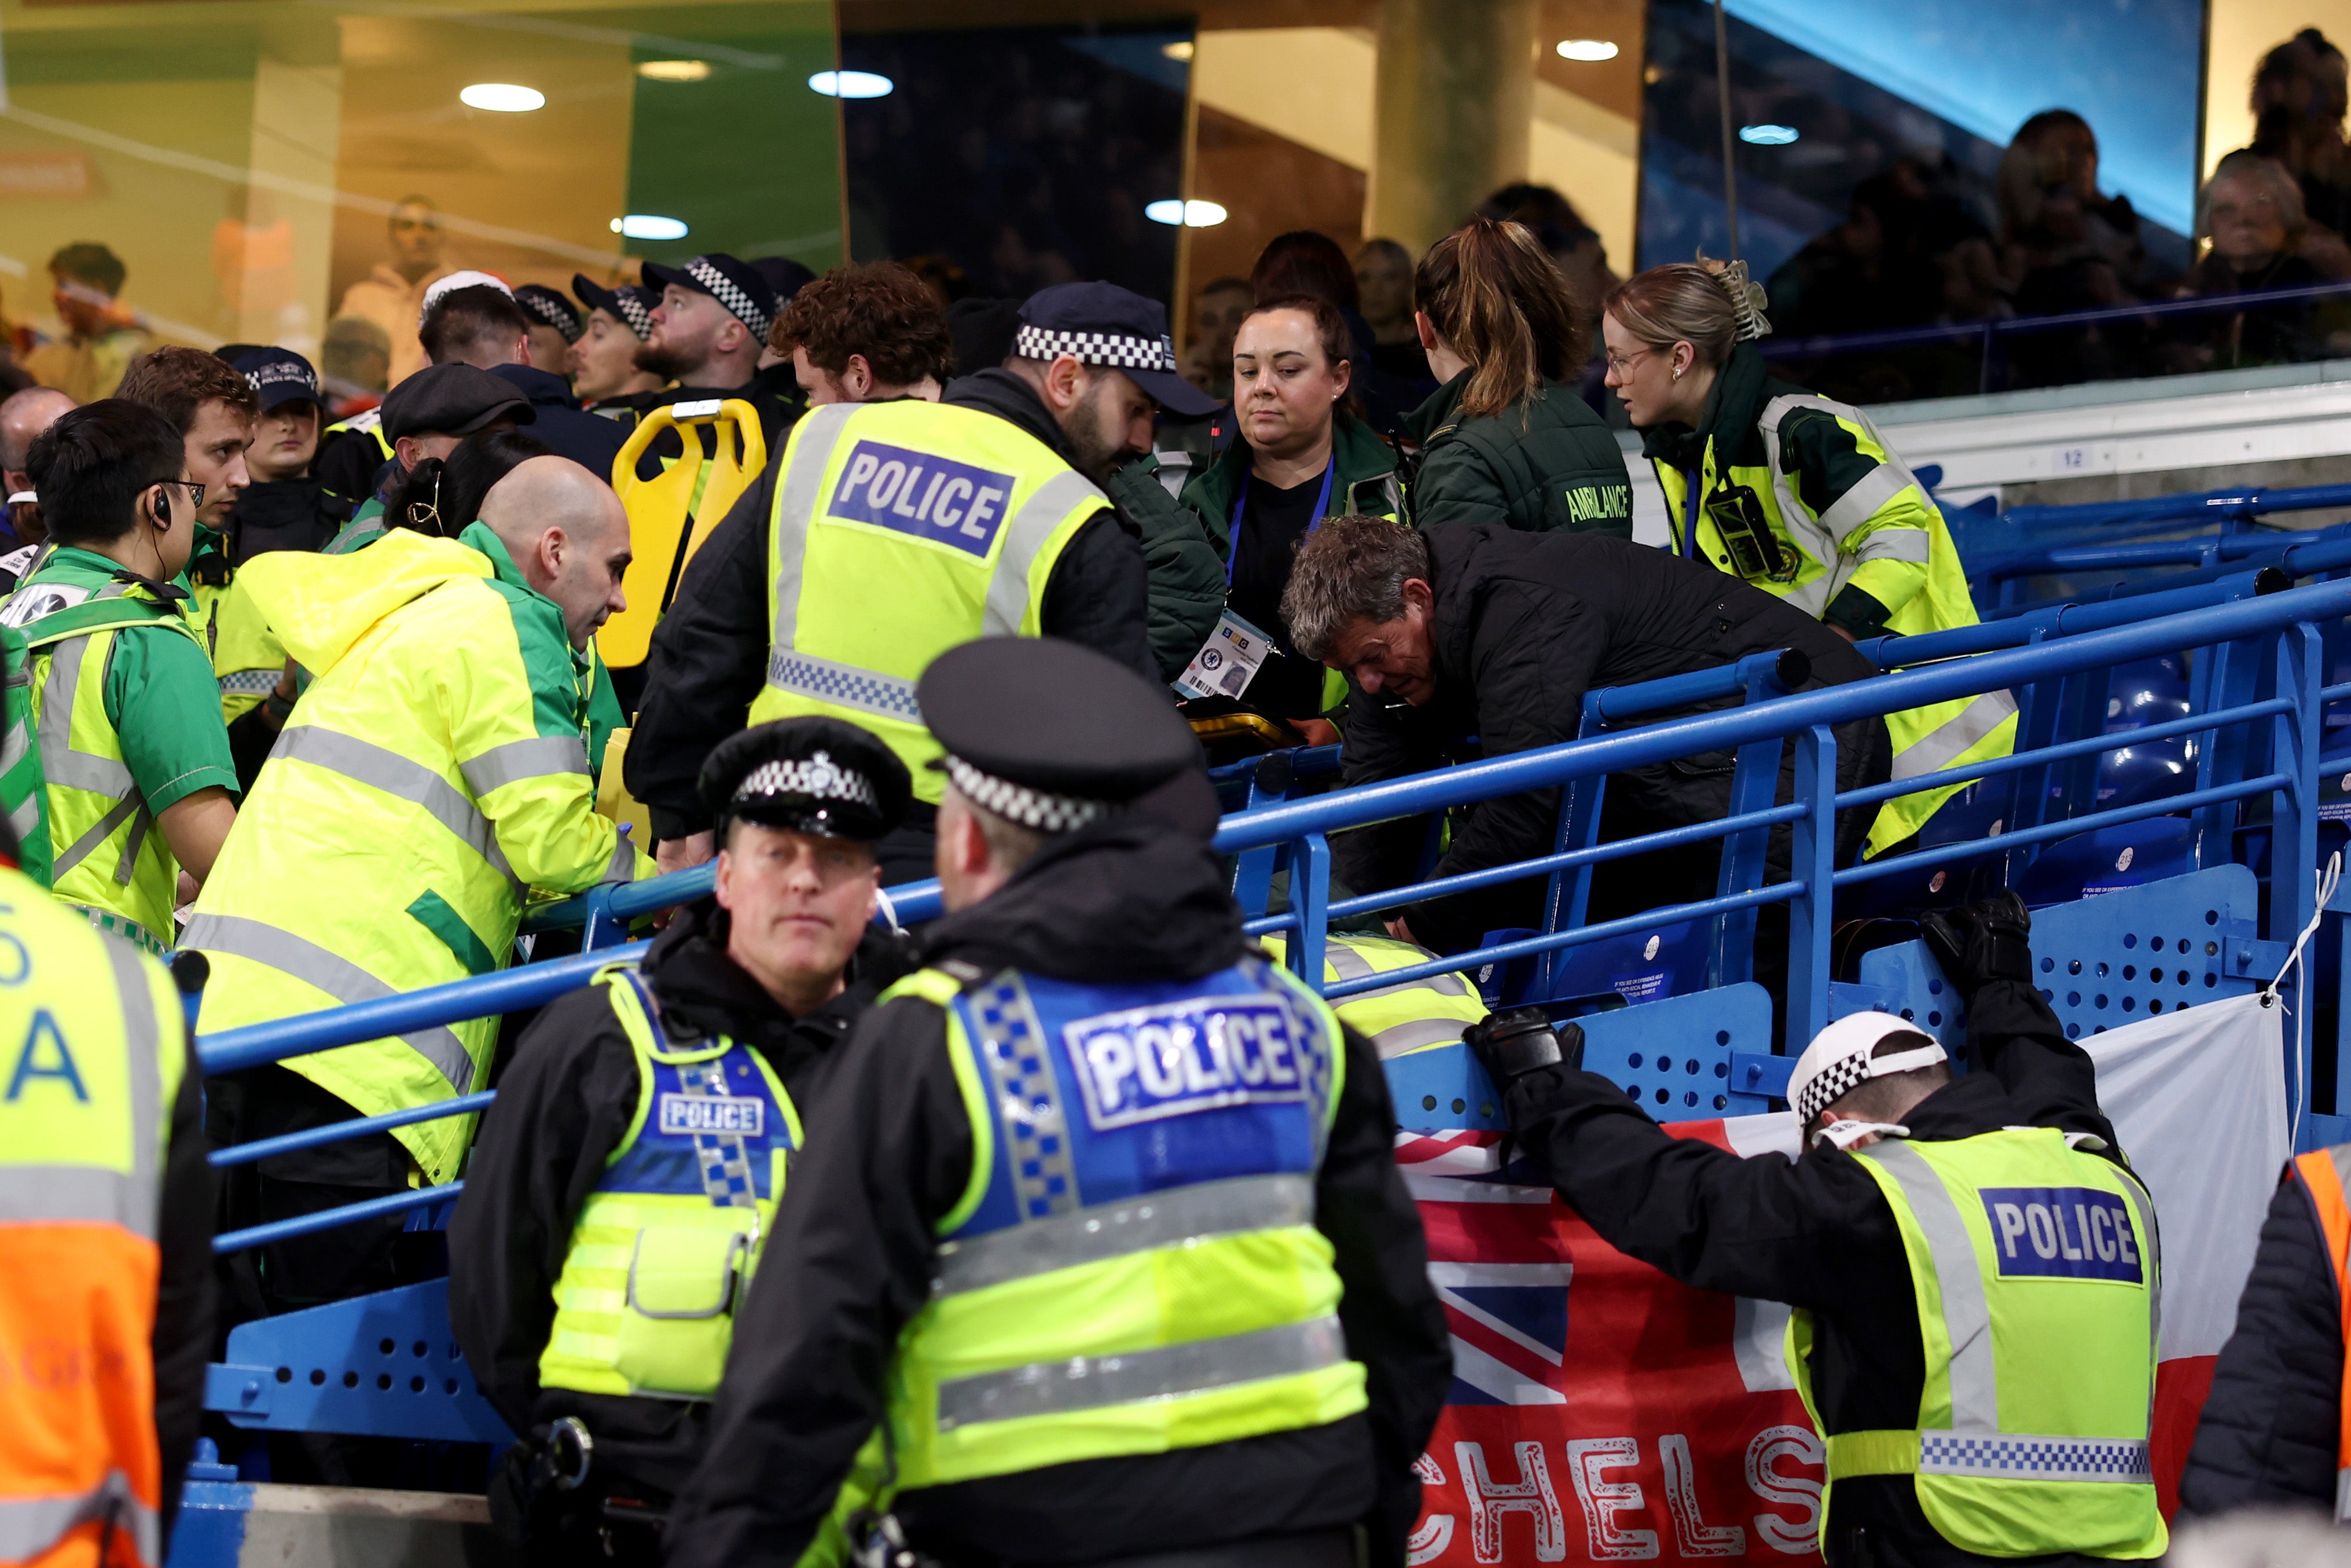 A Leeds fan received treatment in the stands during the FA Cup clash